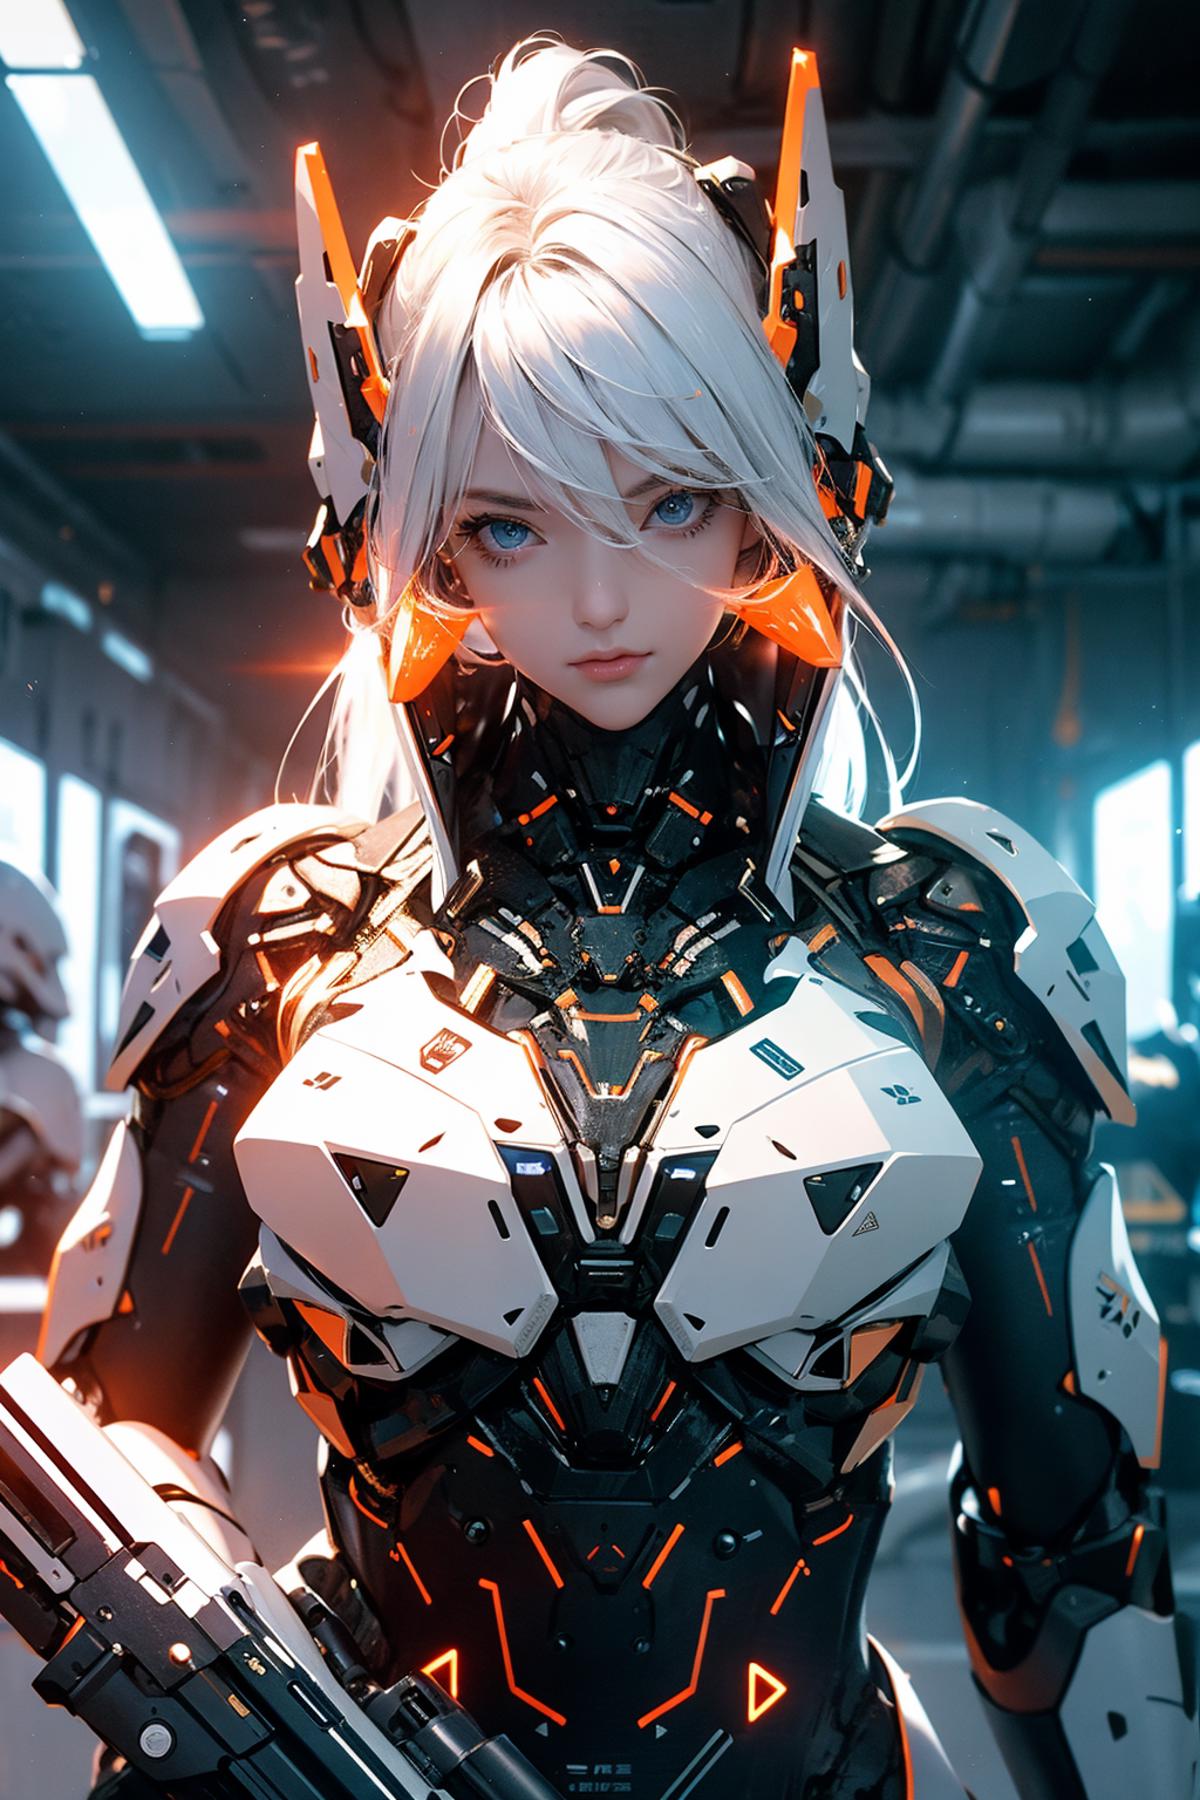 A Cyborg Woman in White and Black Armor with Blue Eyes